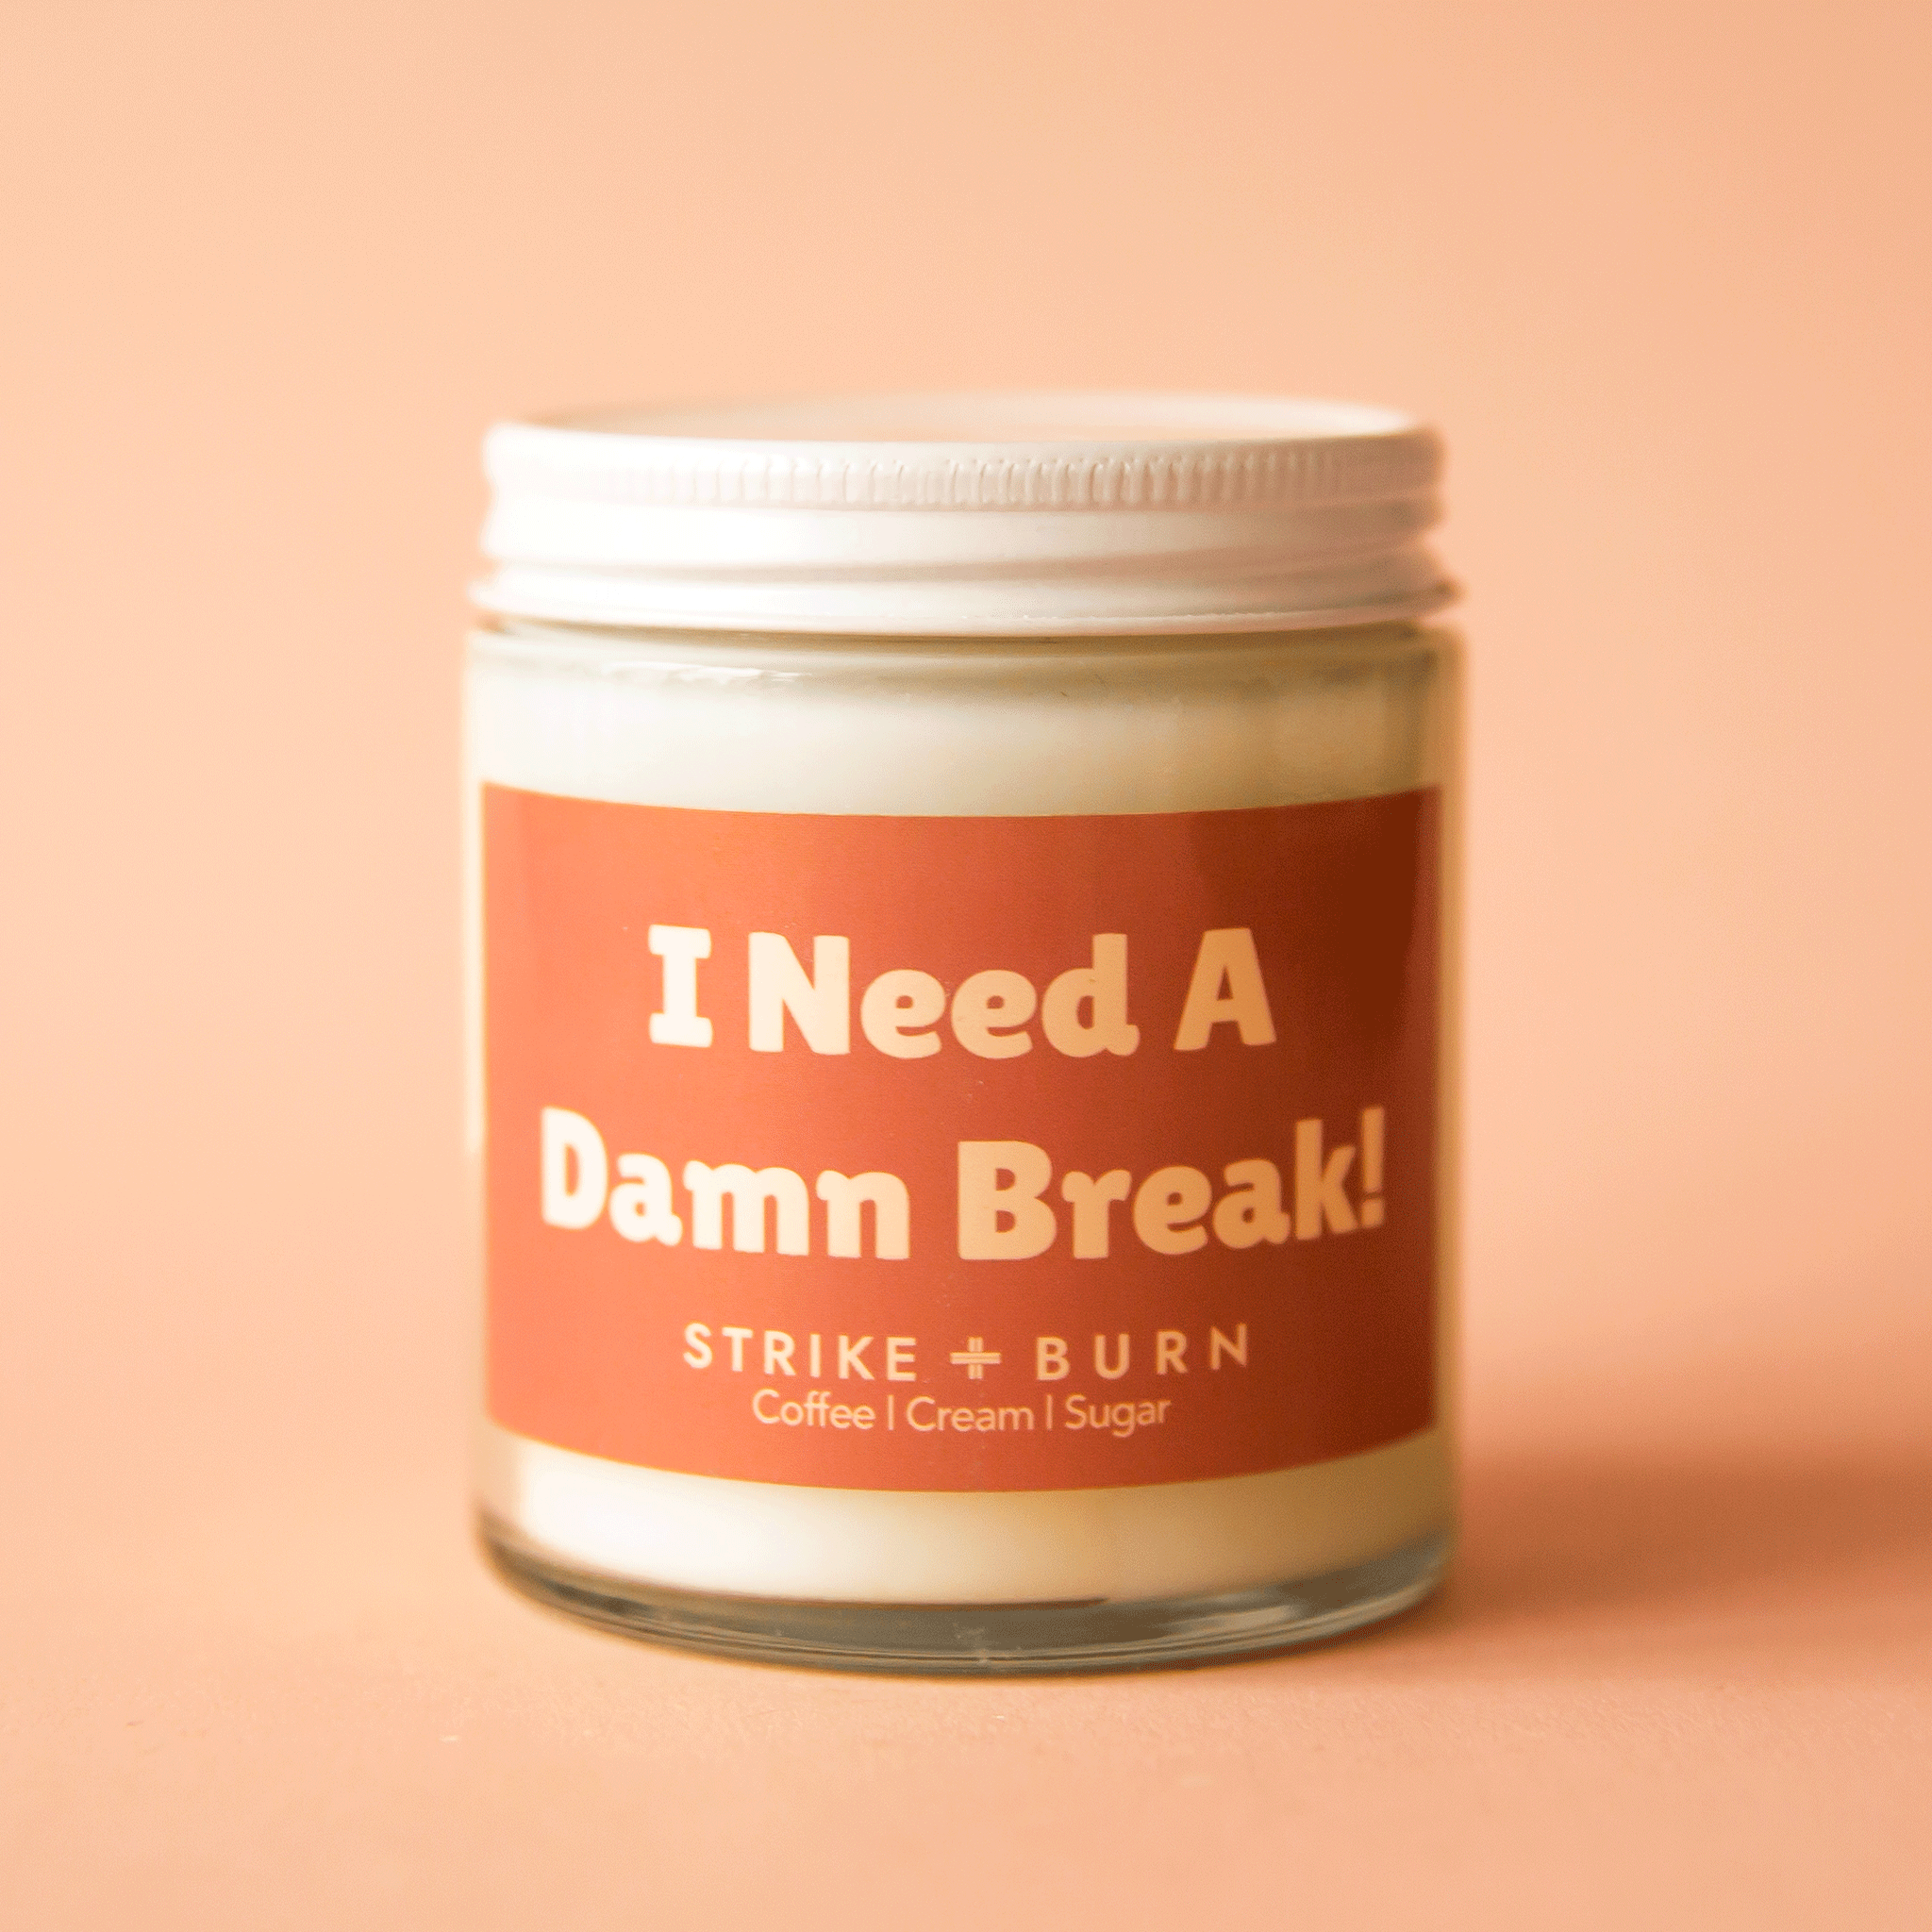 On a peach background is a clear glass jar candle with a warm brown label that reads, "I Need A Damn Break!". 